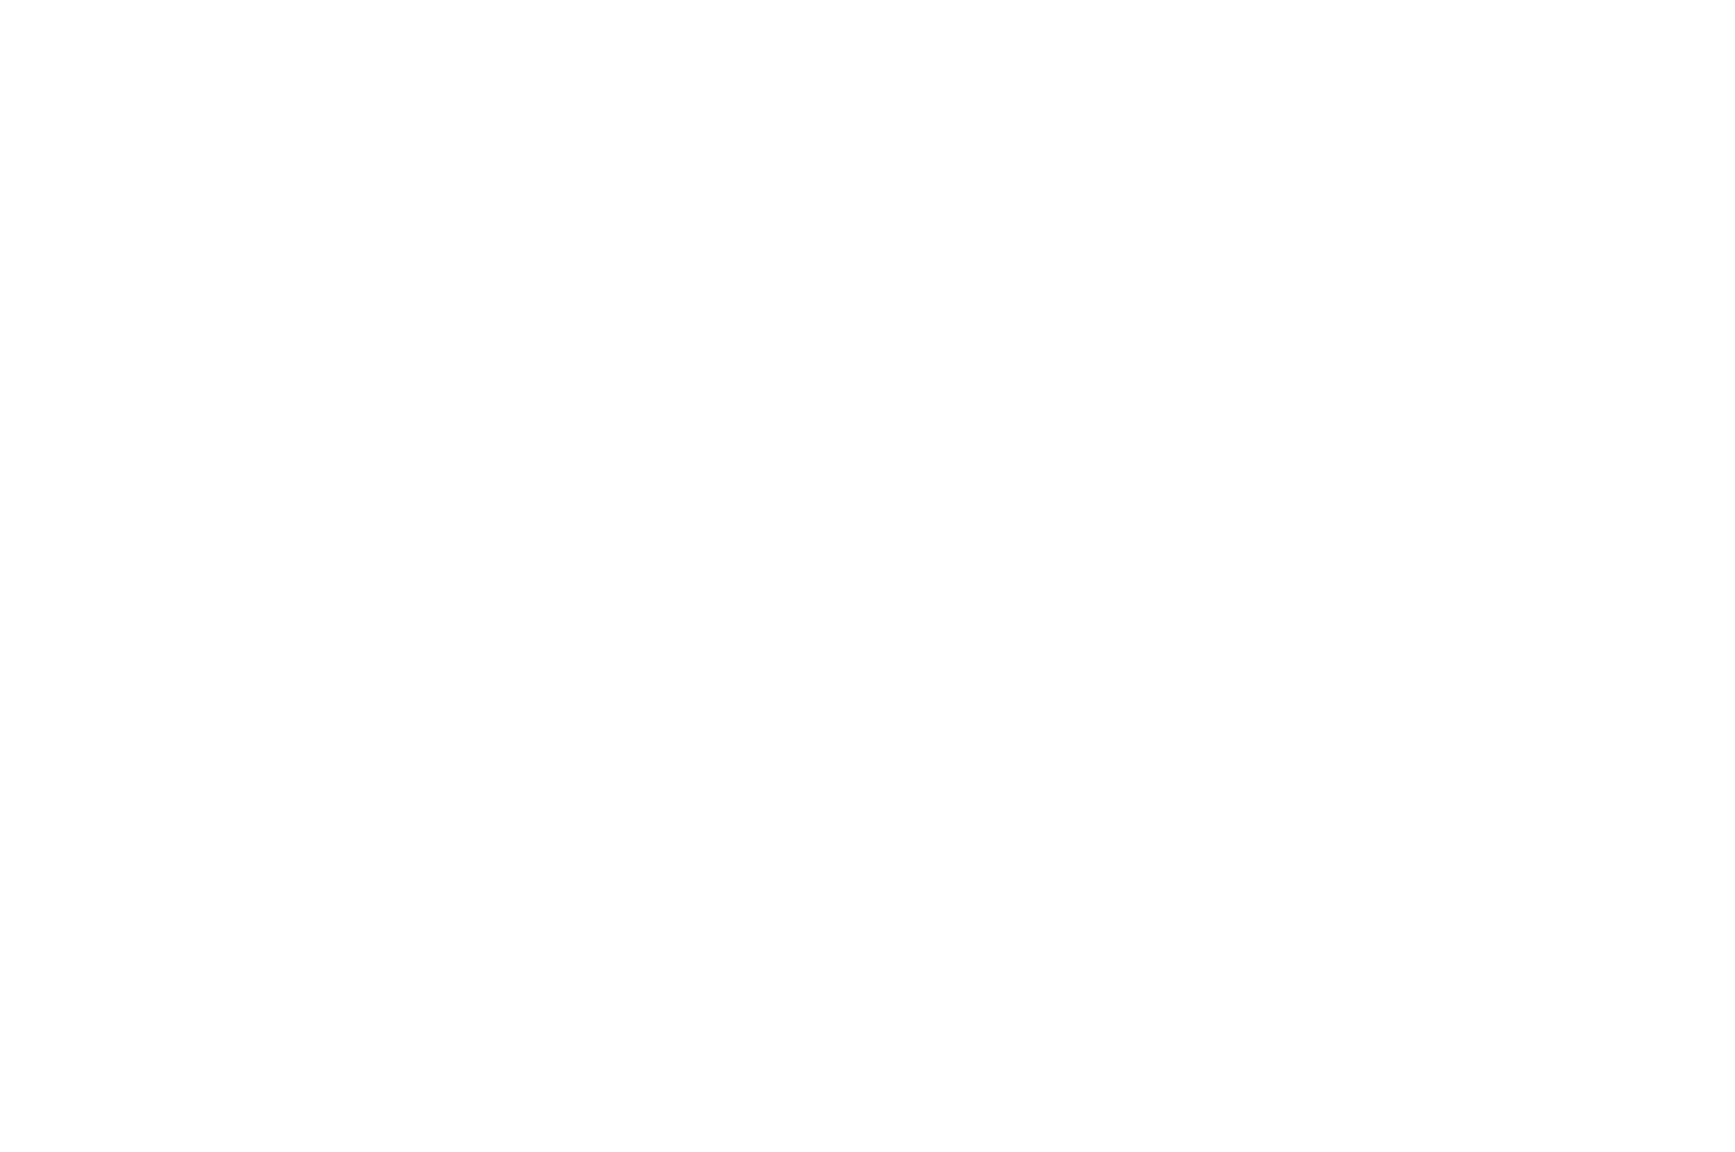 OFFICIAL SELECTION - ART IN MOTION Film Festival - Best Short Documentary Cinematography 2024